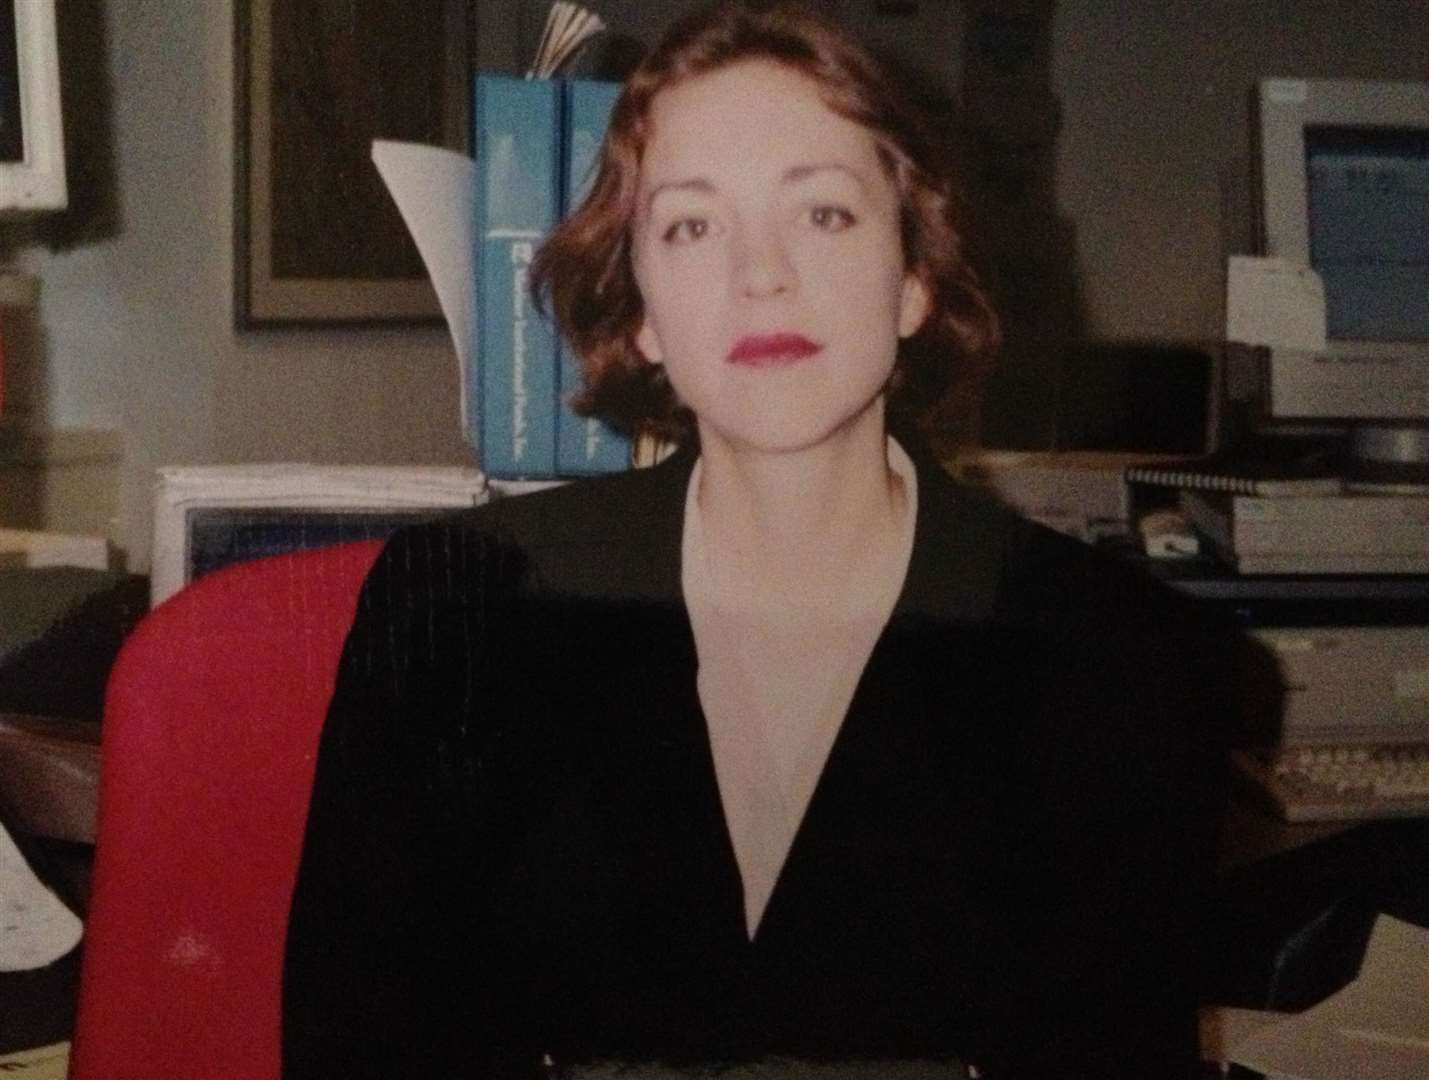 Emma Slade pictured in New York in 1995, while working for HSBC